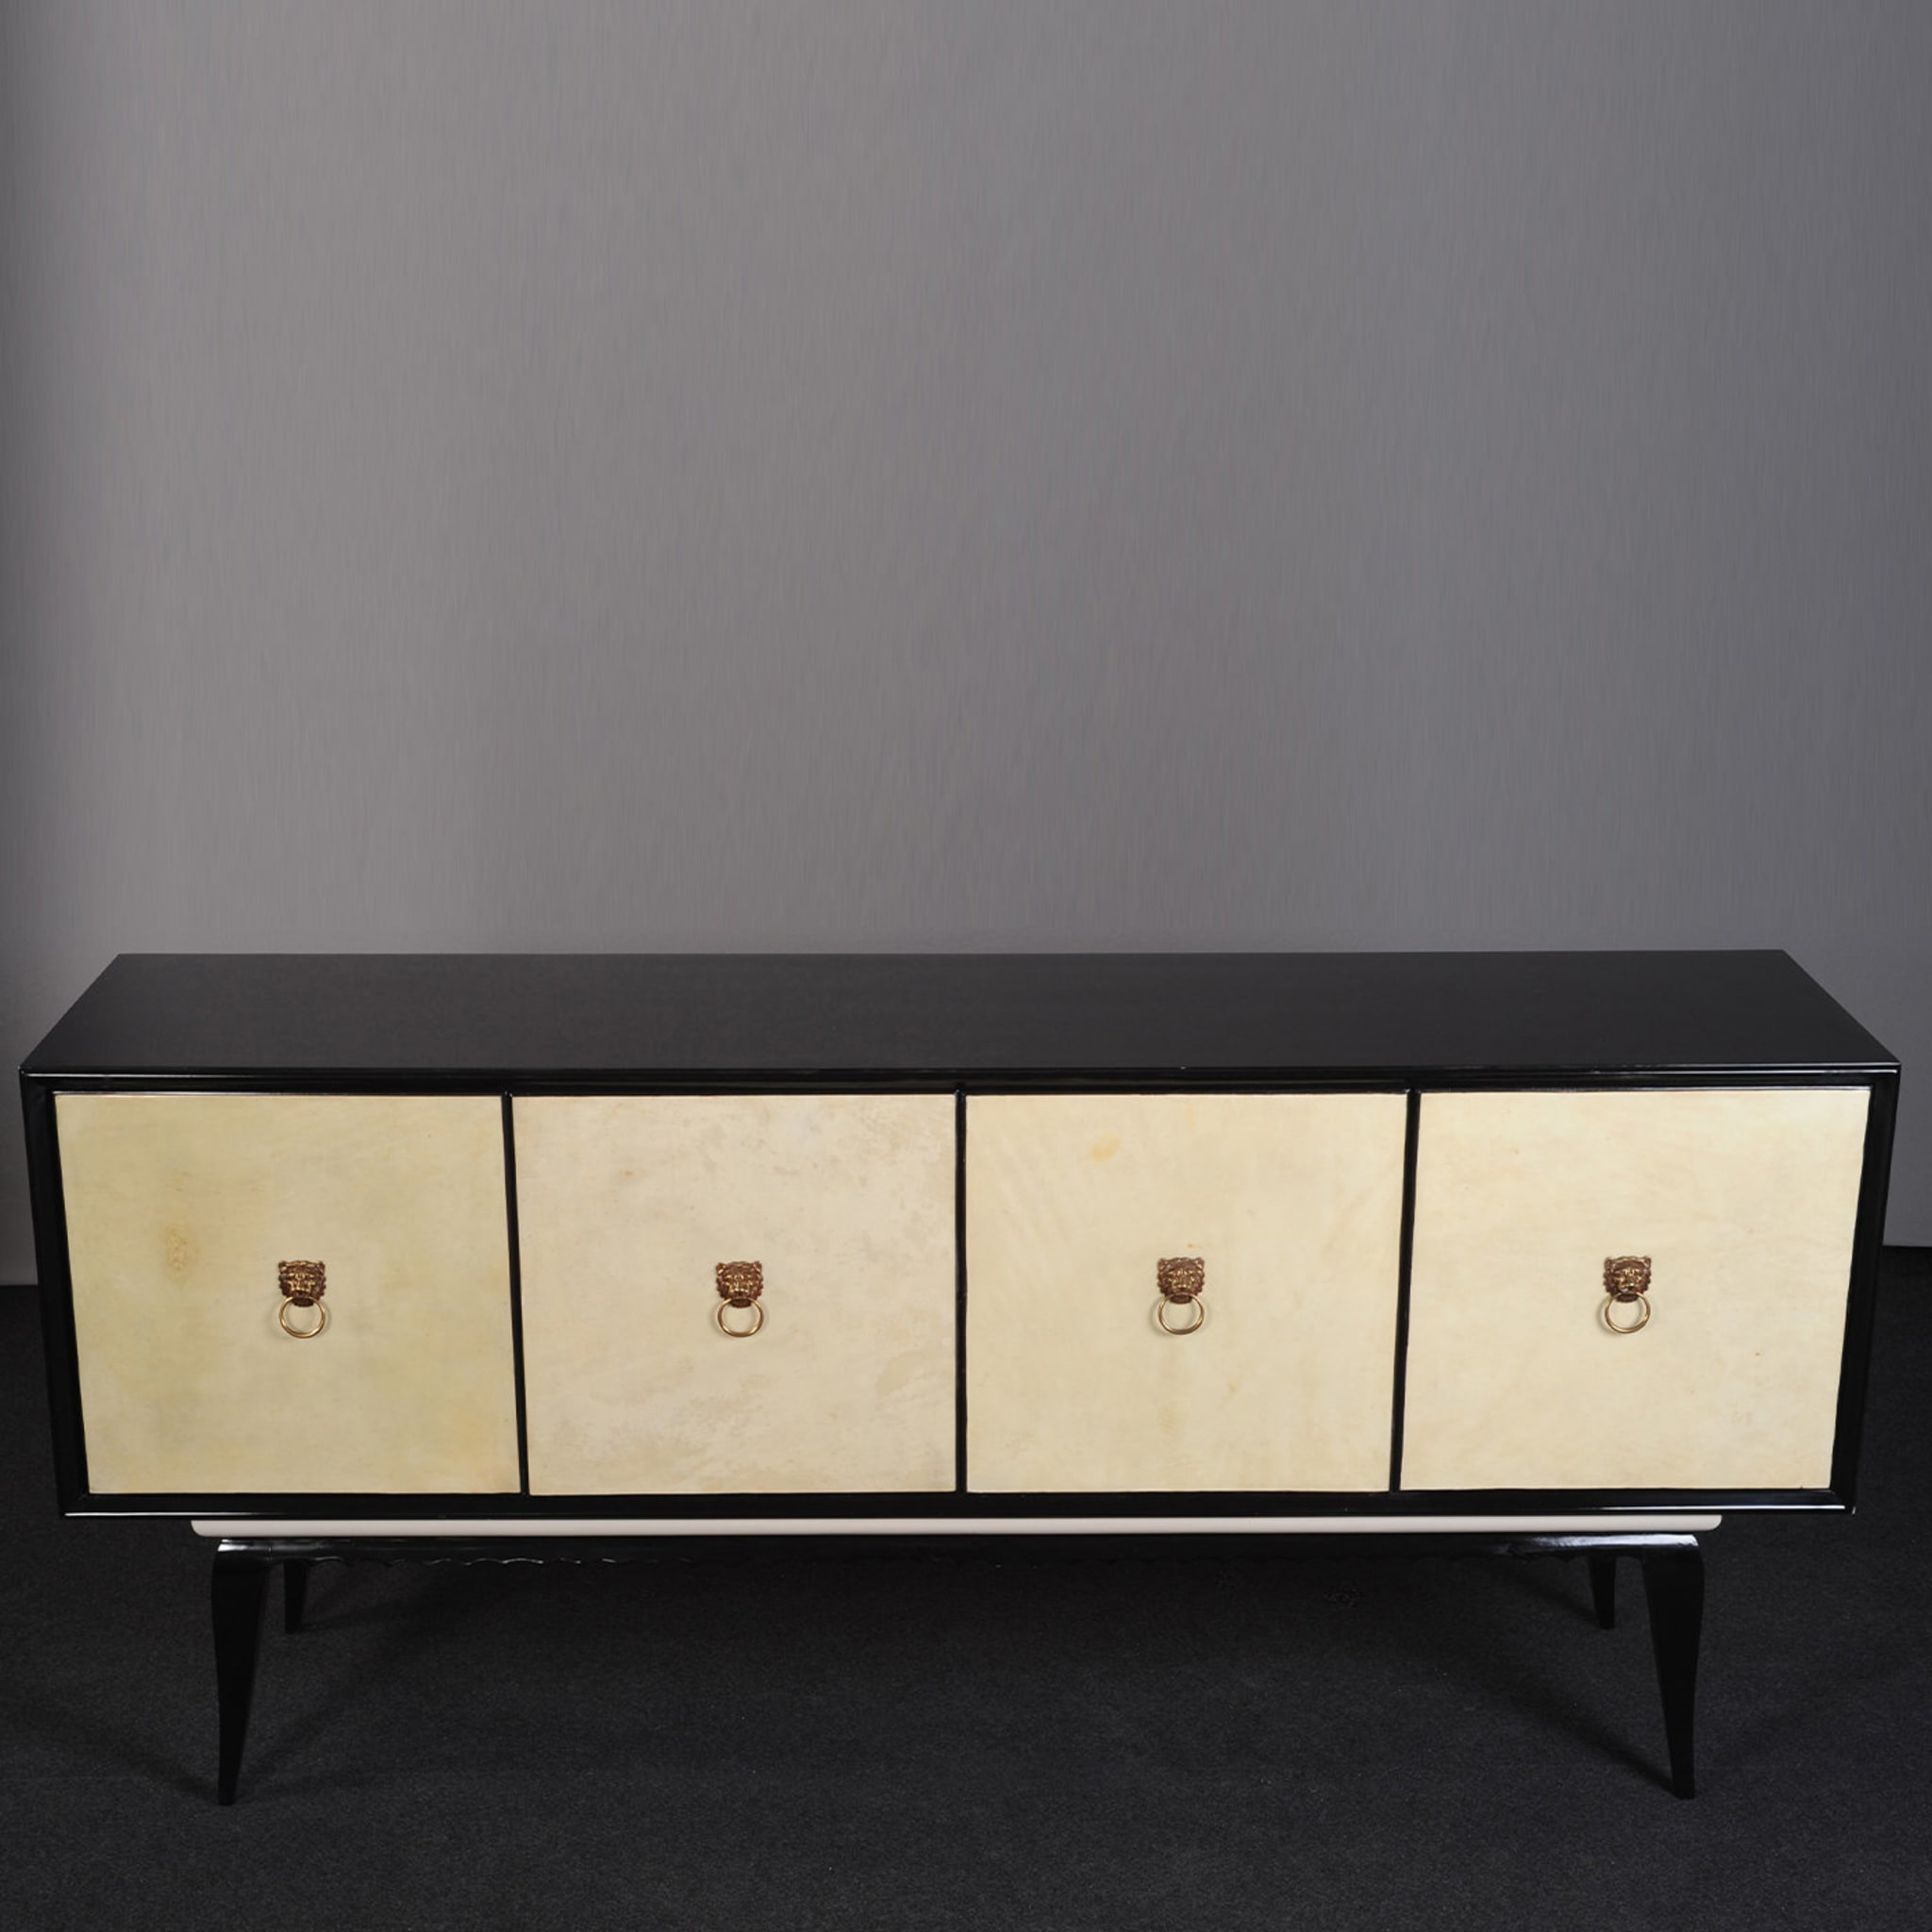 PLM-0004 Black and Ivory Parchment Sideboard - Alternative view 2